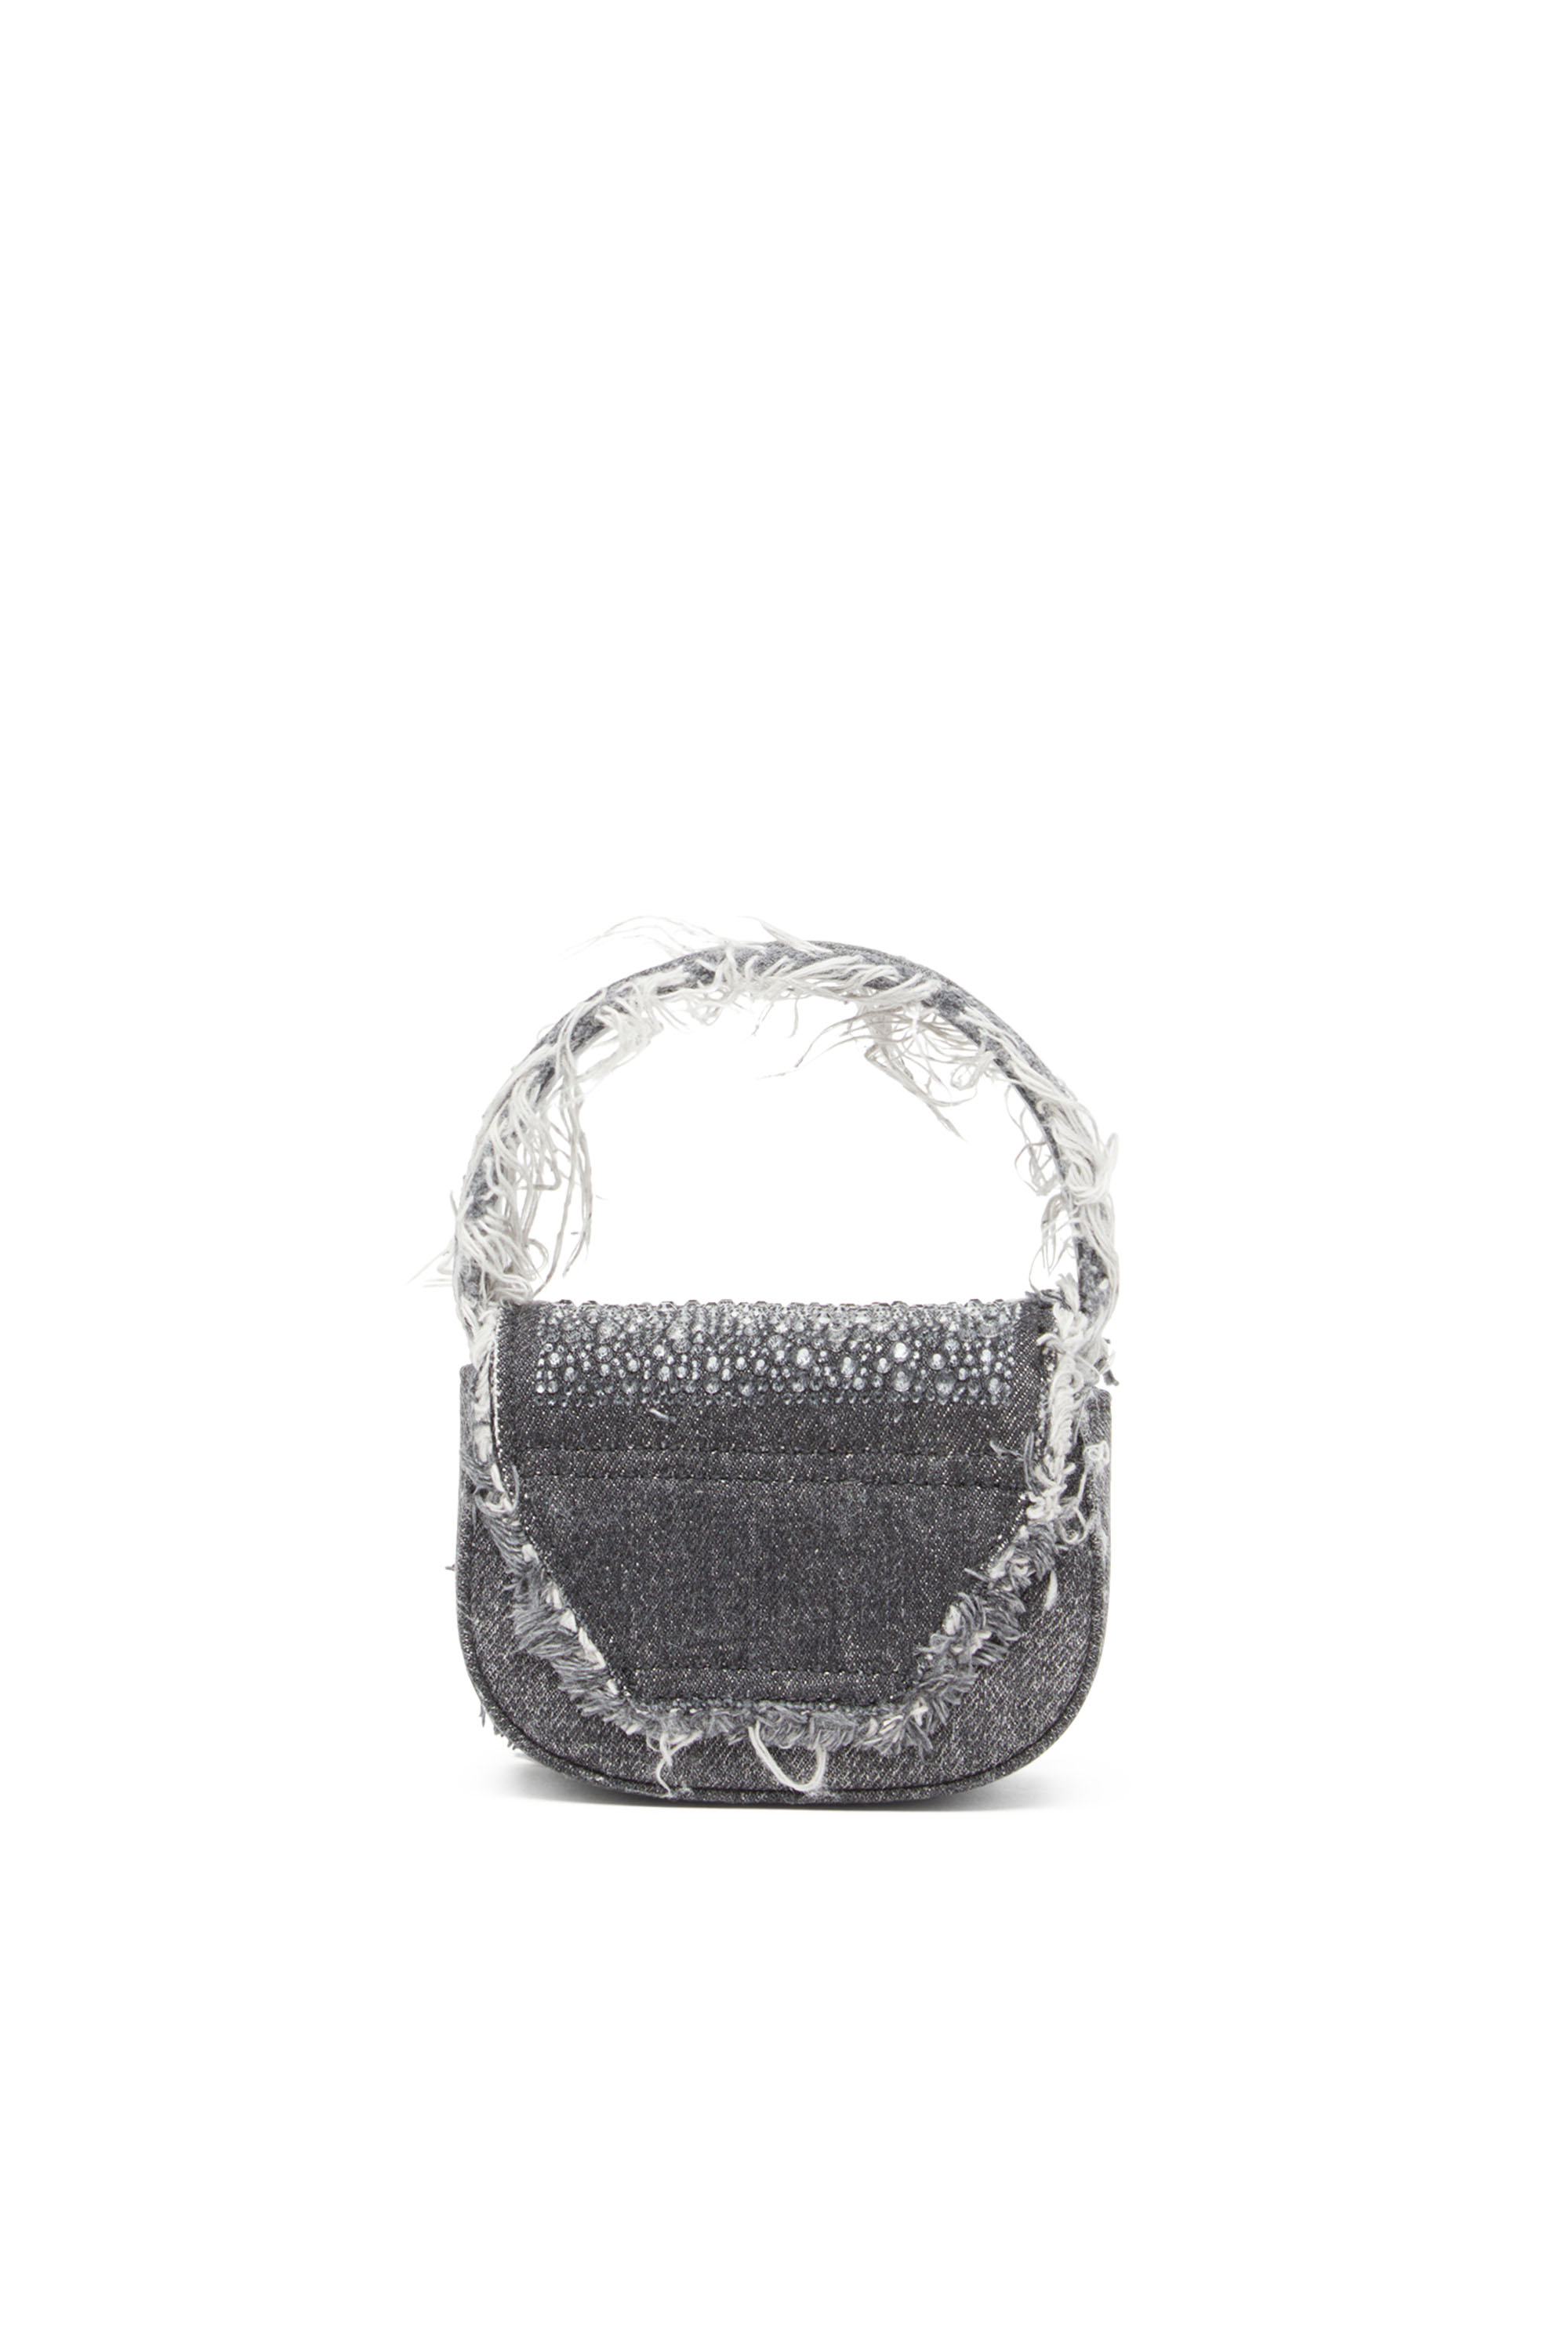 Diesel - 1DR XS, Female 1DR XS-Iconic mini bag in denim and crystals in ブラック - Image 2